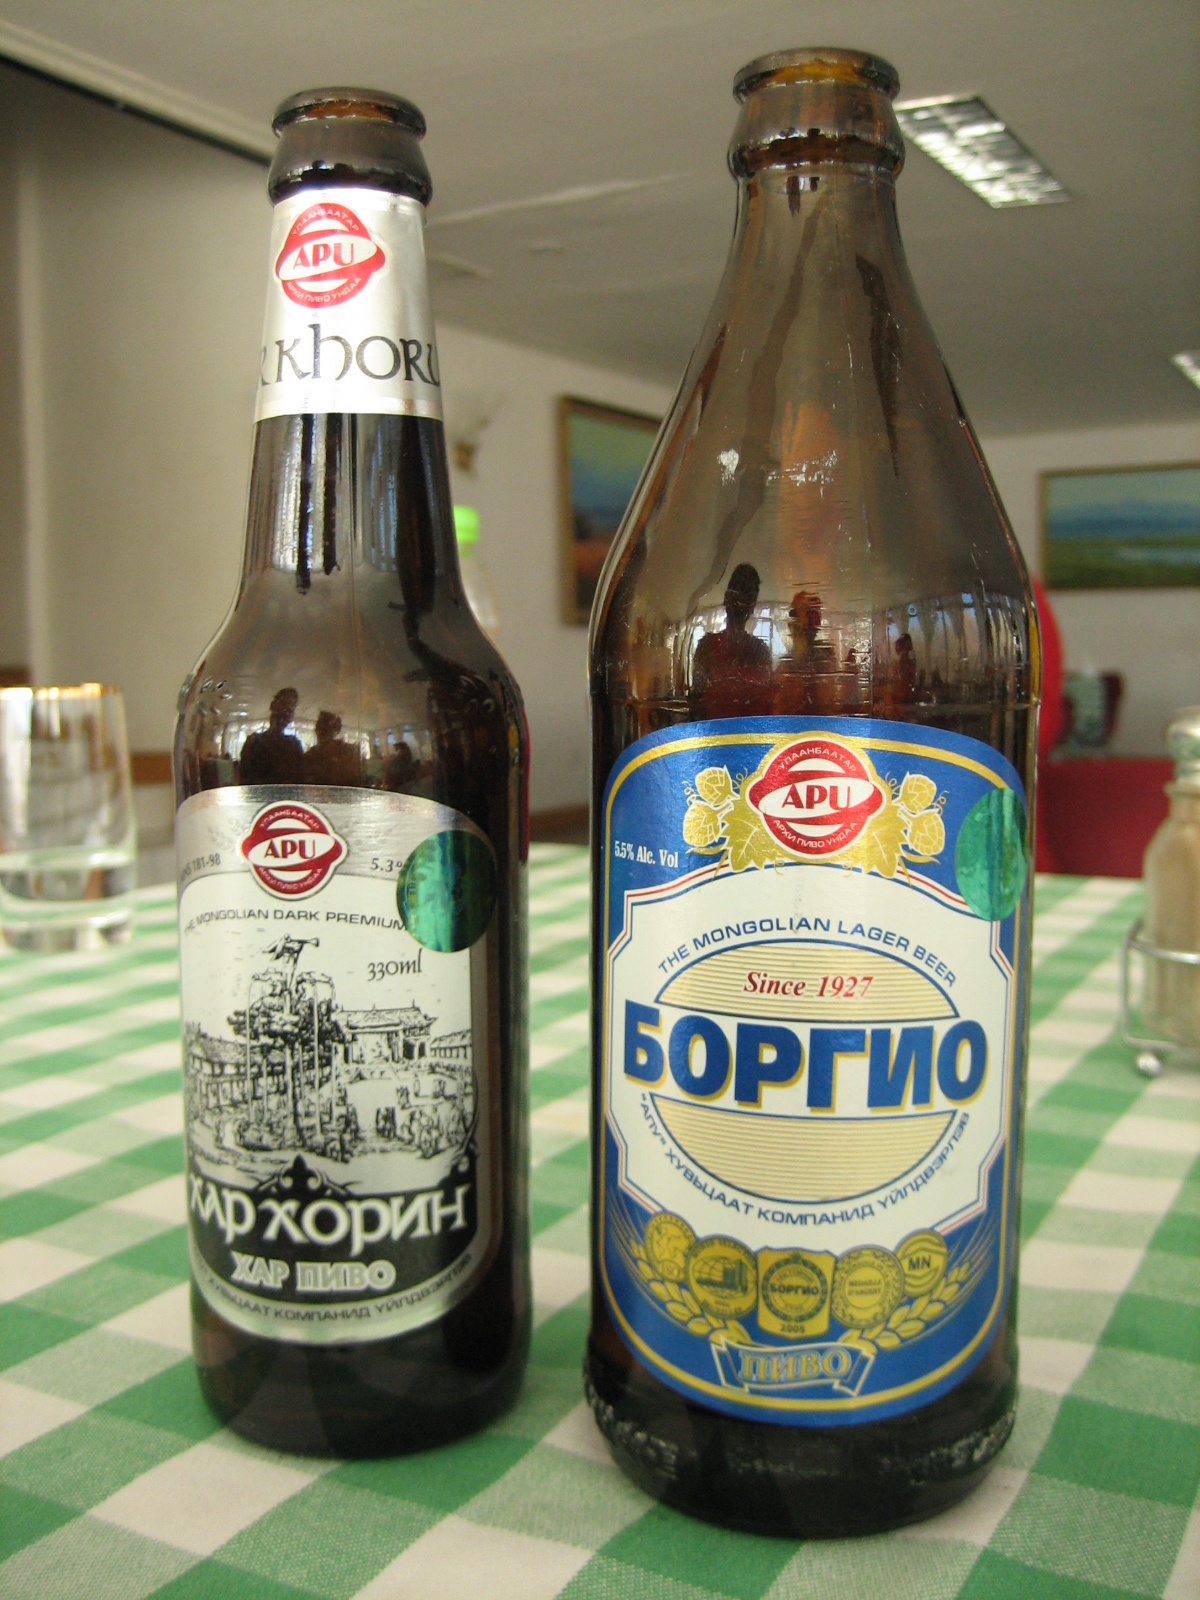 two beer bottles next to each other on a green and white tablecloth